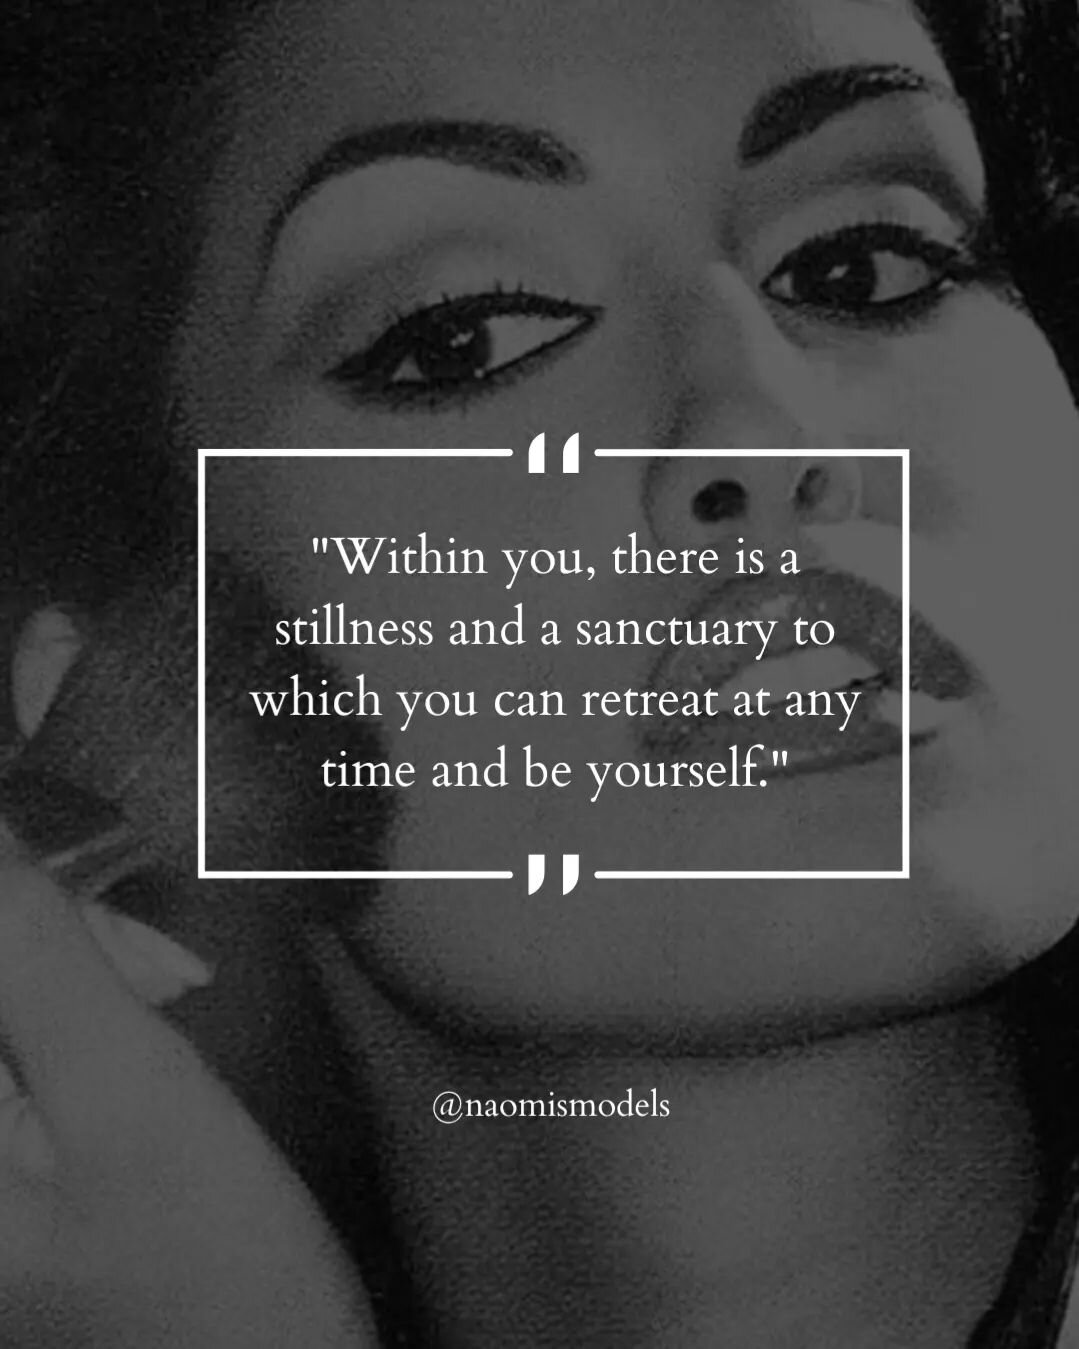 &quot;Within you, there is a stillness and a sanctuary to which you can retreat at any time and be yourself.&quot;

#naomismodels #quoteoftheday #inspiration #motivation #models #nycmodels #castingagency #modelscout #selflove #selfcare